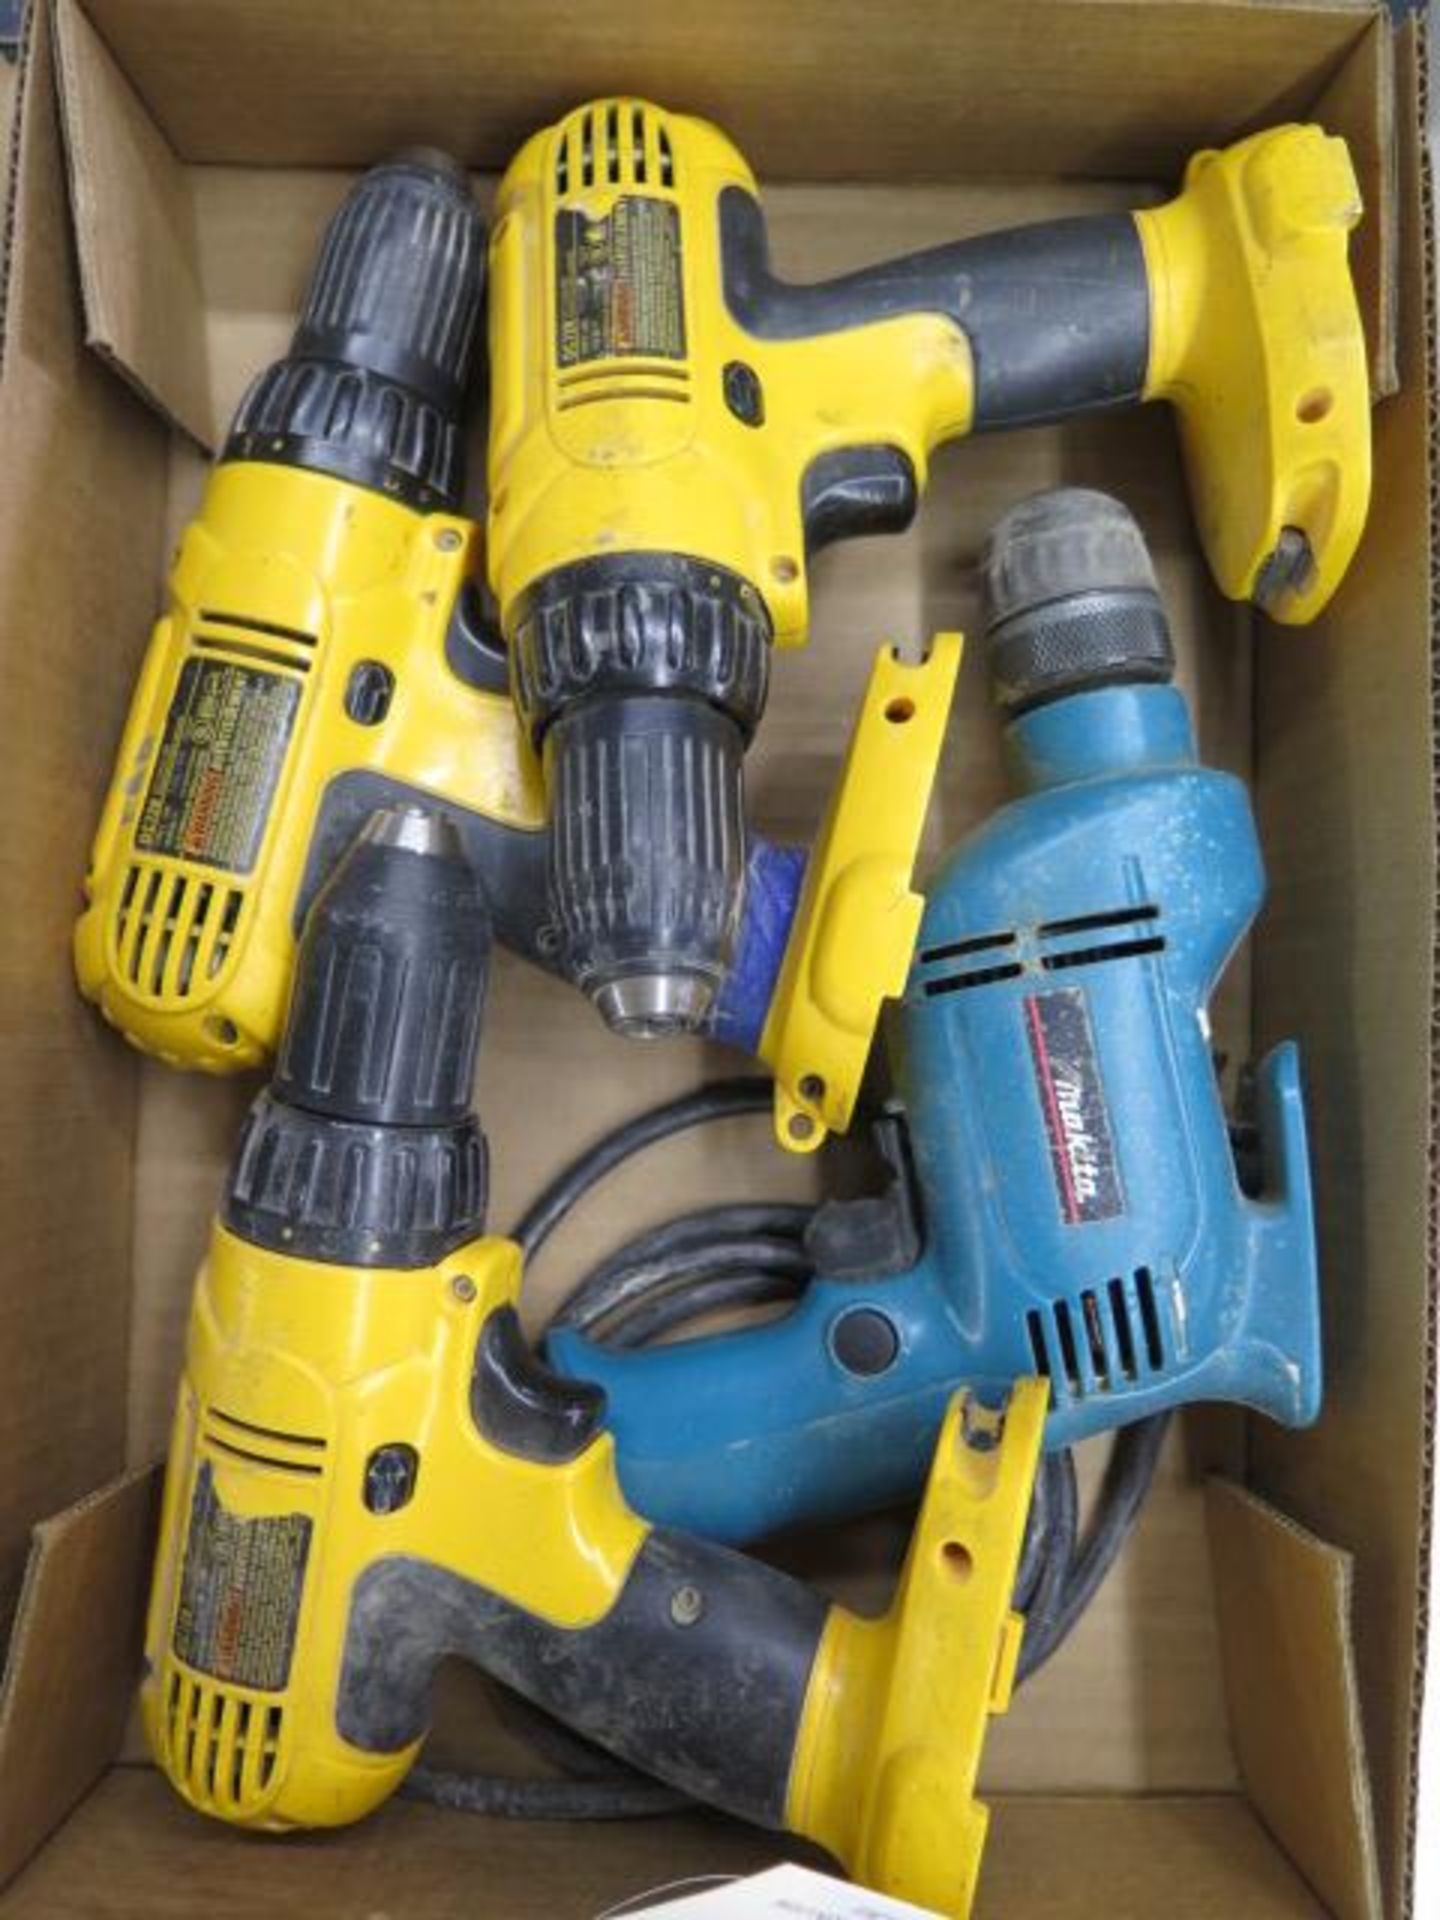 DeWalt 14.4Volt Cordless Drills (3) (NO CHARGER OR BARRERIES) and Makita Electric Drill (SOLD AS- - Bild 2 aus 4